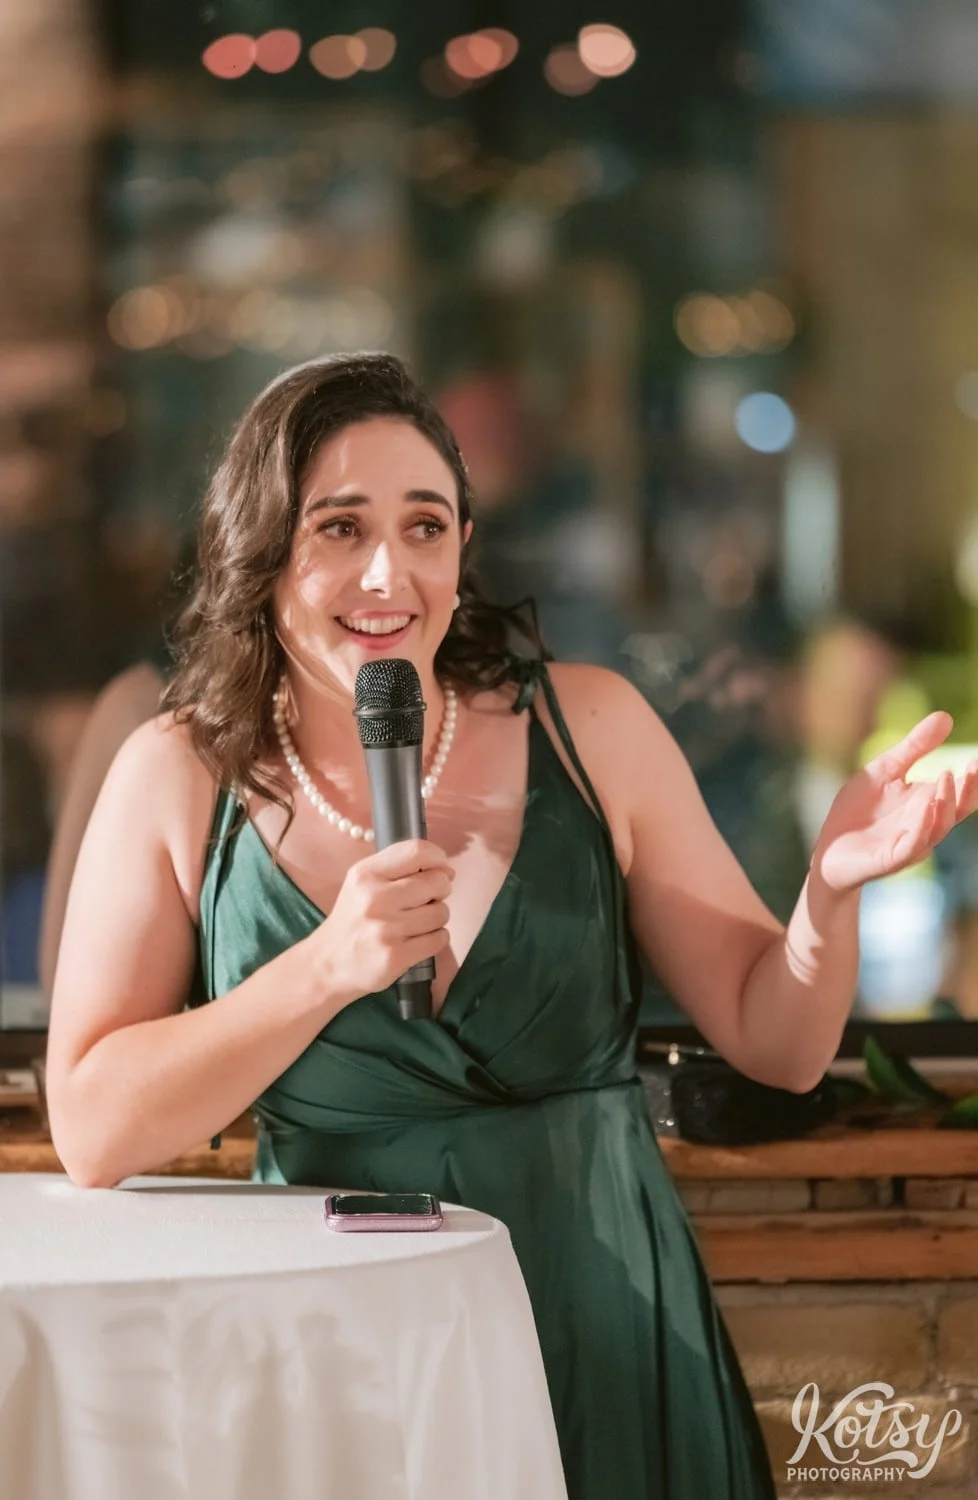 A woman in a green dress speaks into a microphone in front of a table with white cloth on it during a Second Floor Events wedding reception in Toronto, Canada.